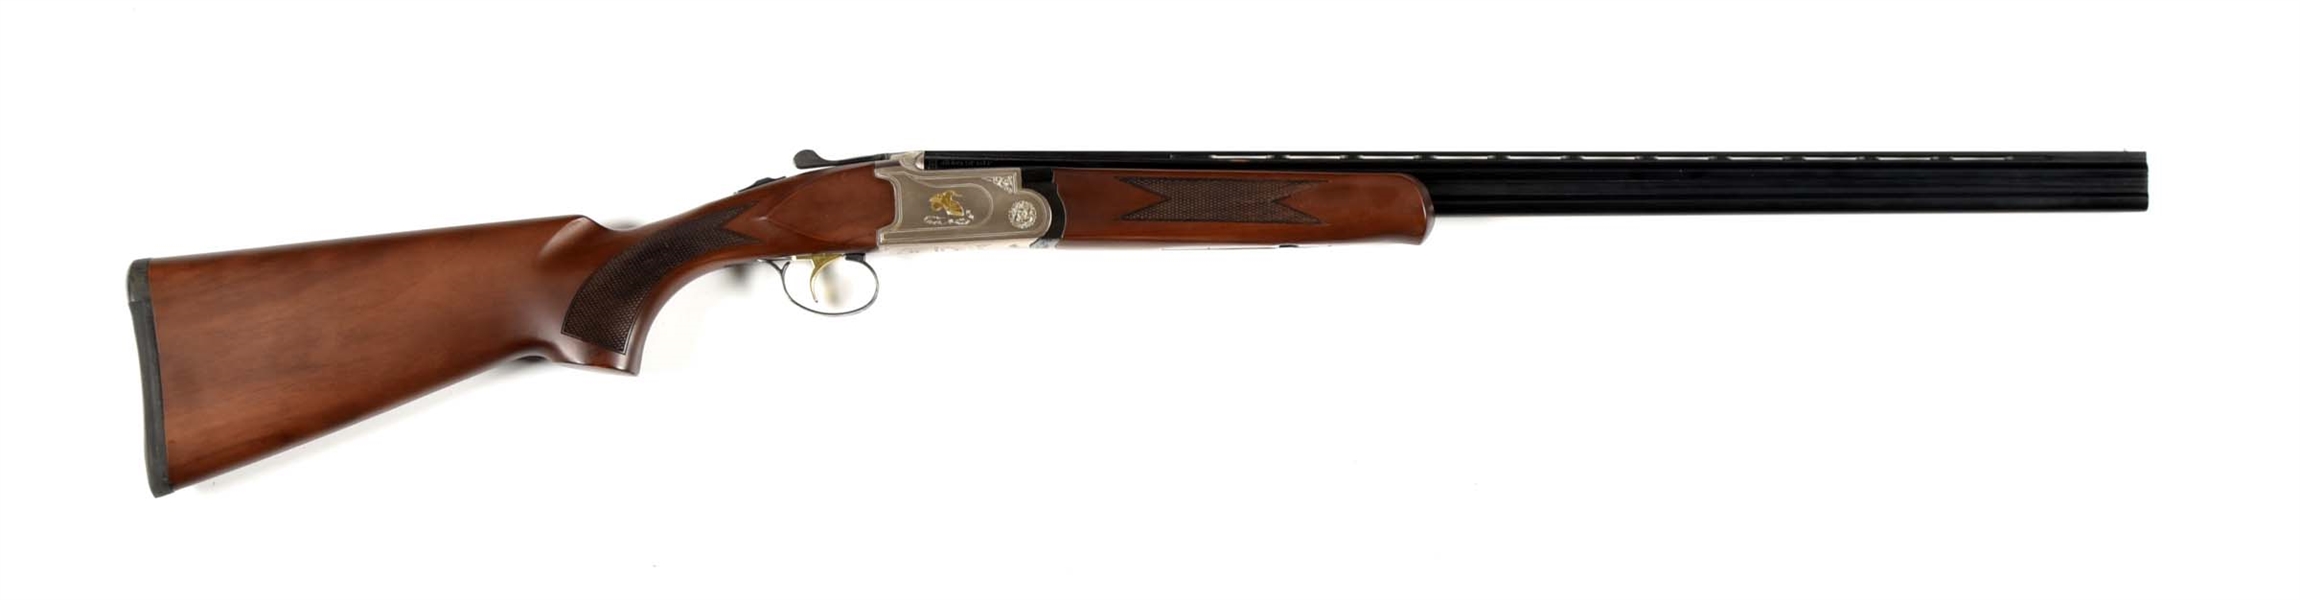 (M) MOSSBERG SILVER RESERVE .410 BORE OVER UNDER SHOTGUN WITH BOX.  